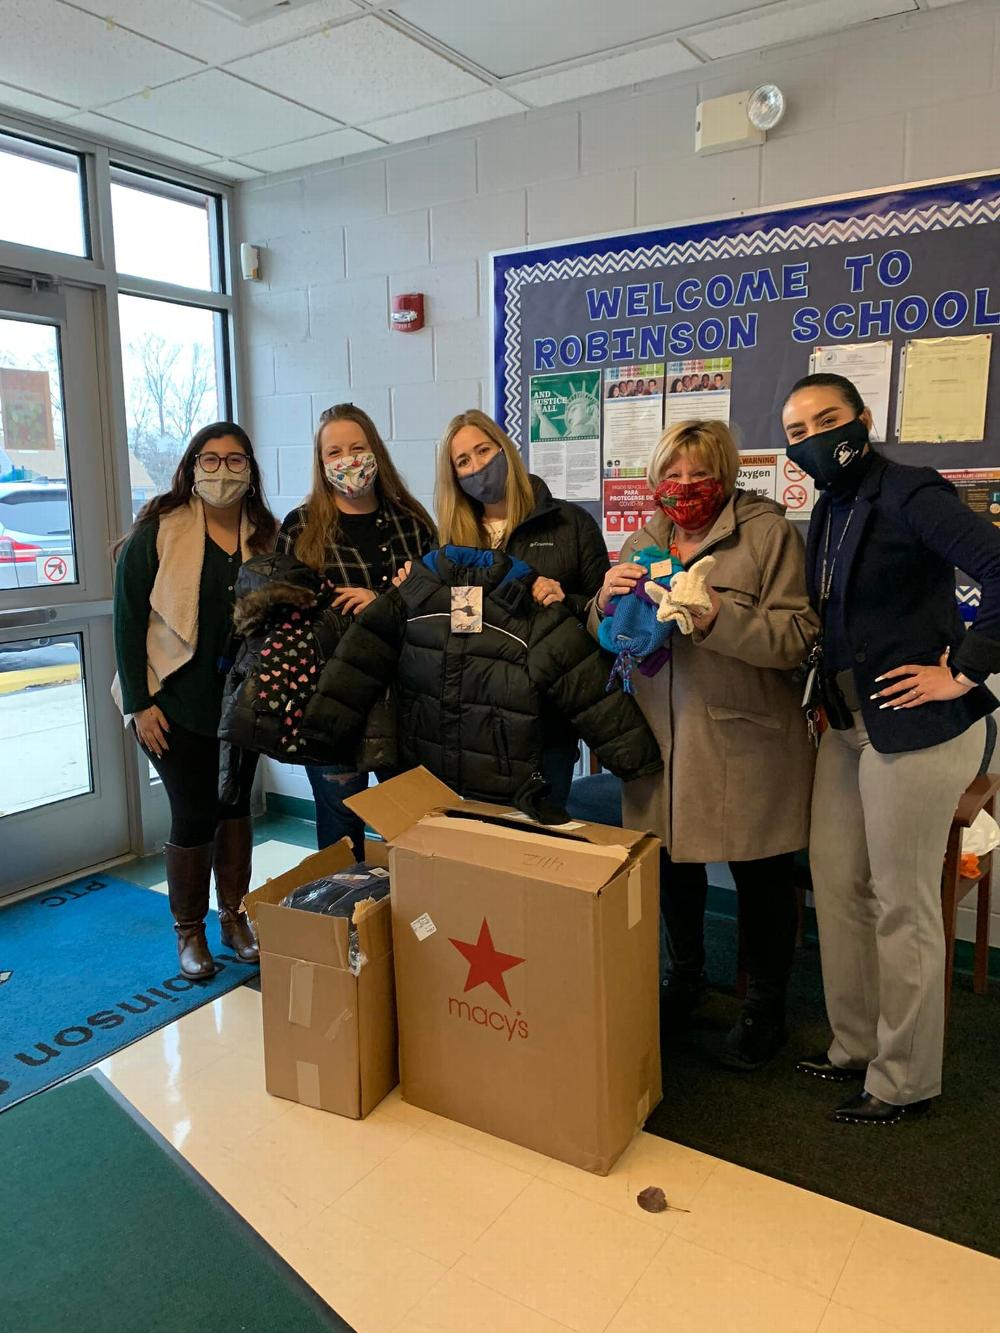 A big shout out to those who helped with the coat drive (three in center from left to right), Nicole D'Alessandro, Alicia Kolasa and Peggy DeGuide.